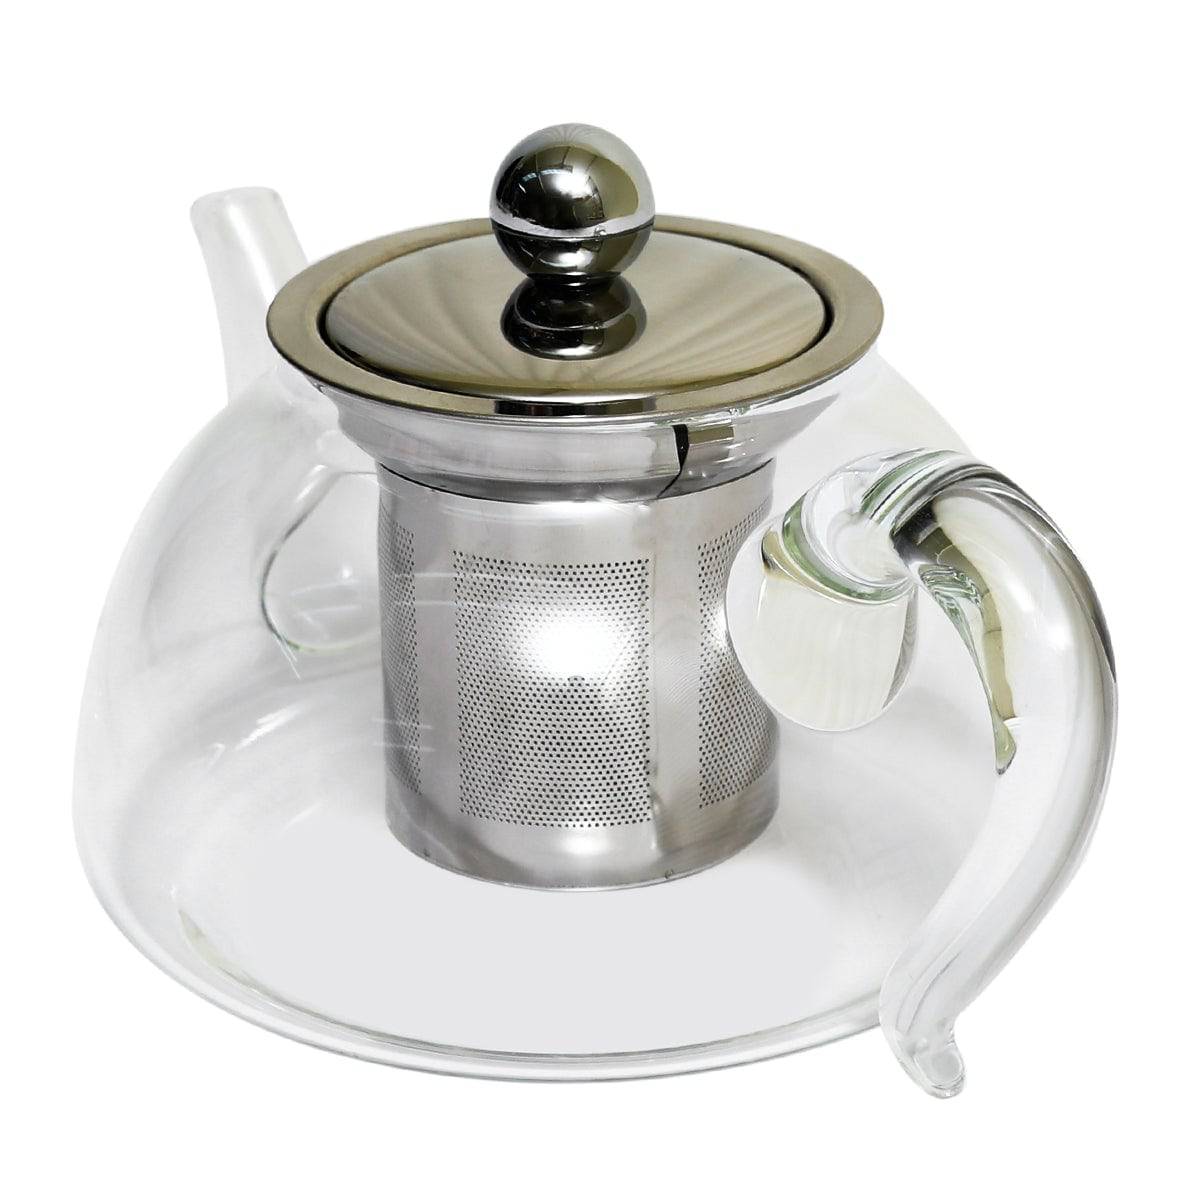 GLASS TEAPOT WITH FILTER.Ibili.621708